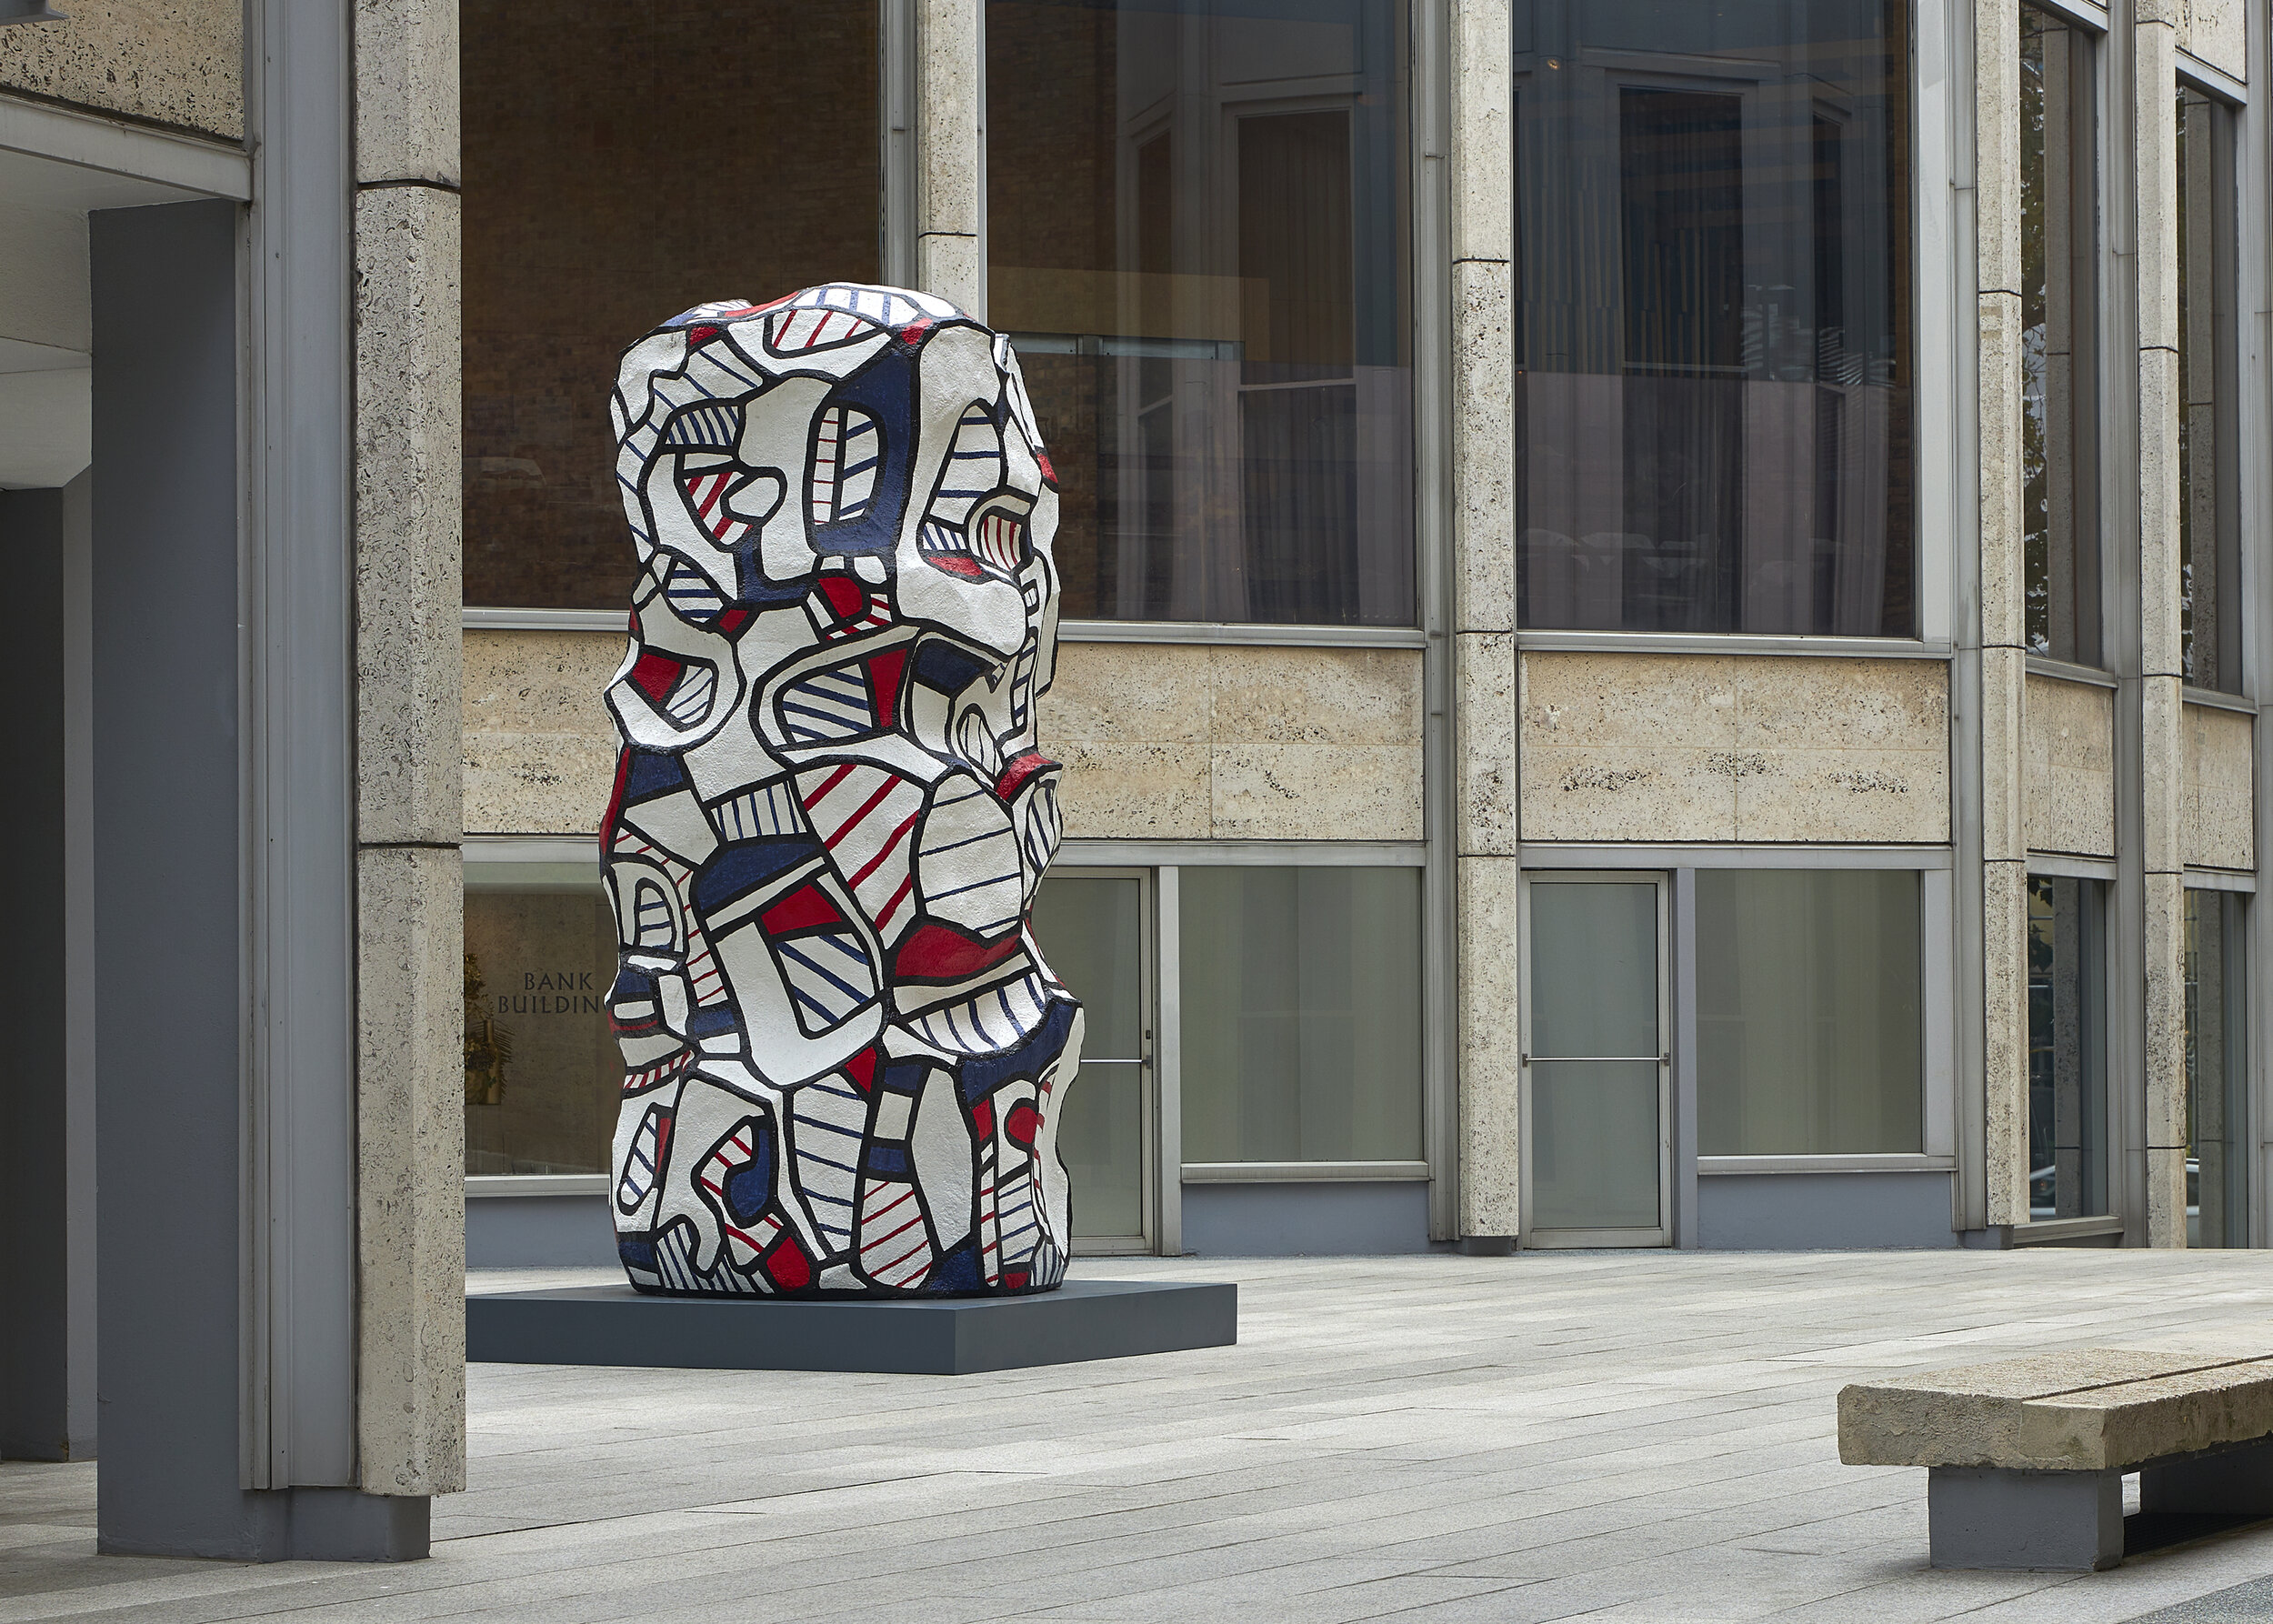 Jean Dubuffet Exhibition Launches at Smithson Plaza